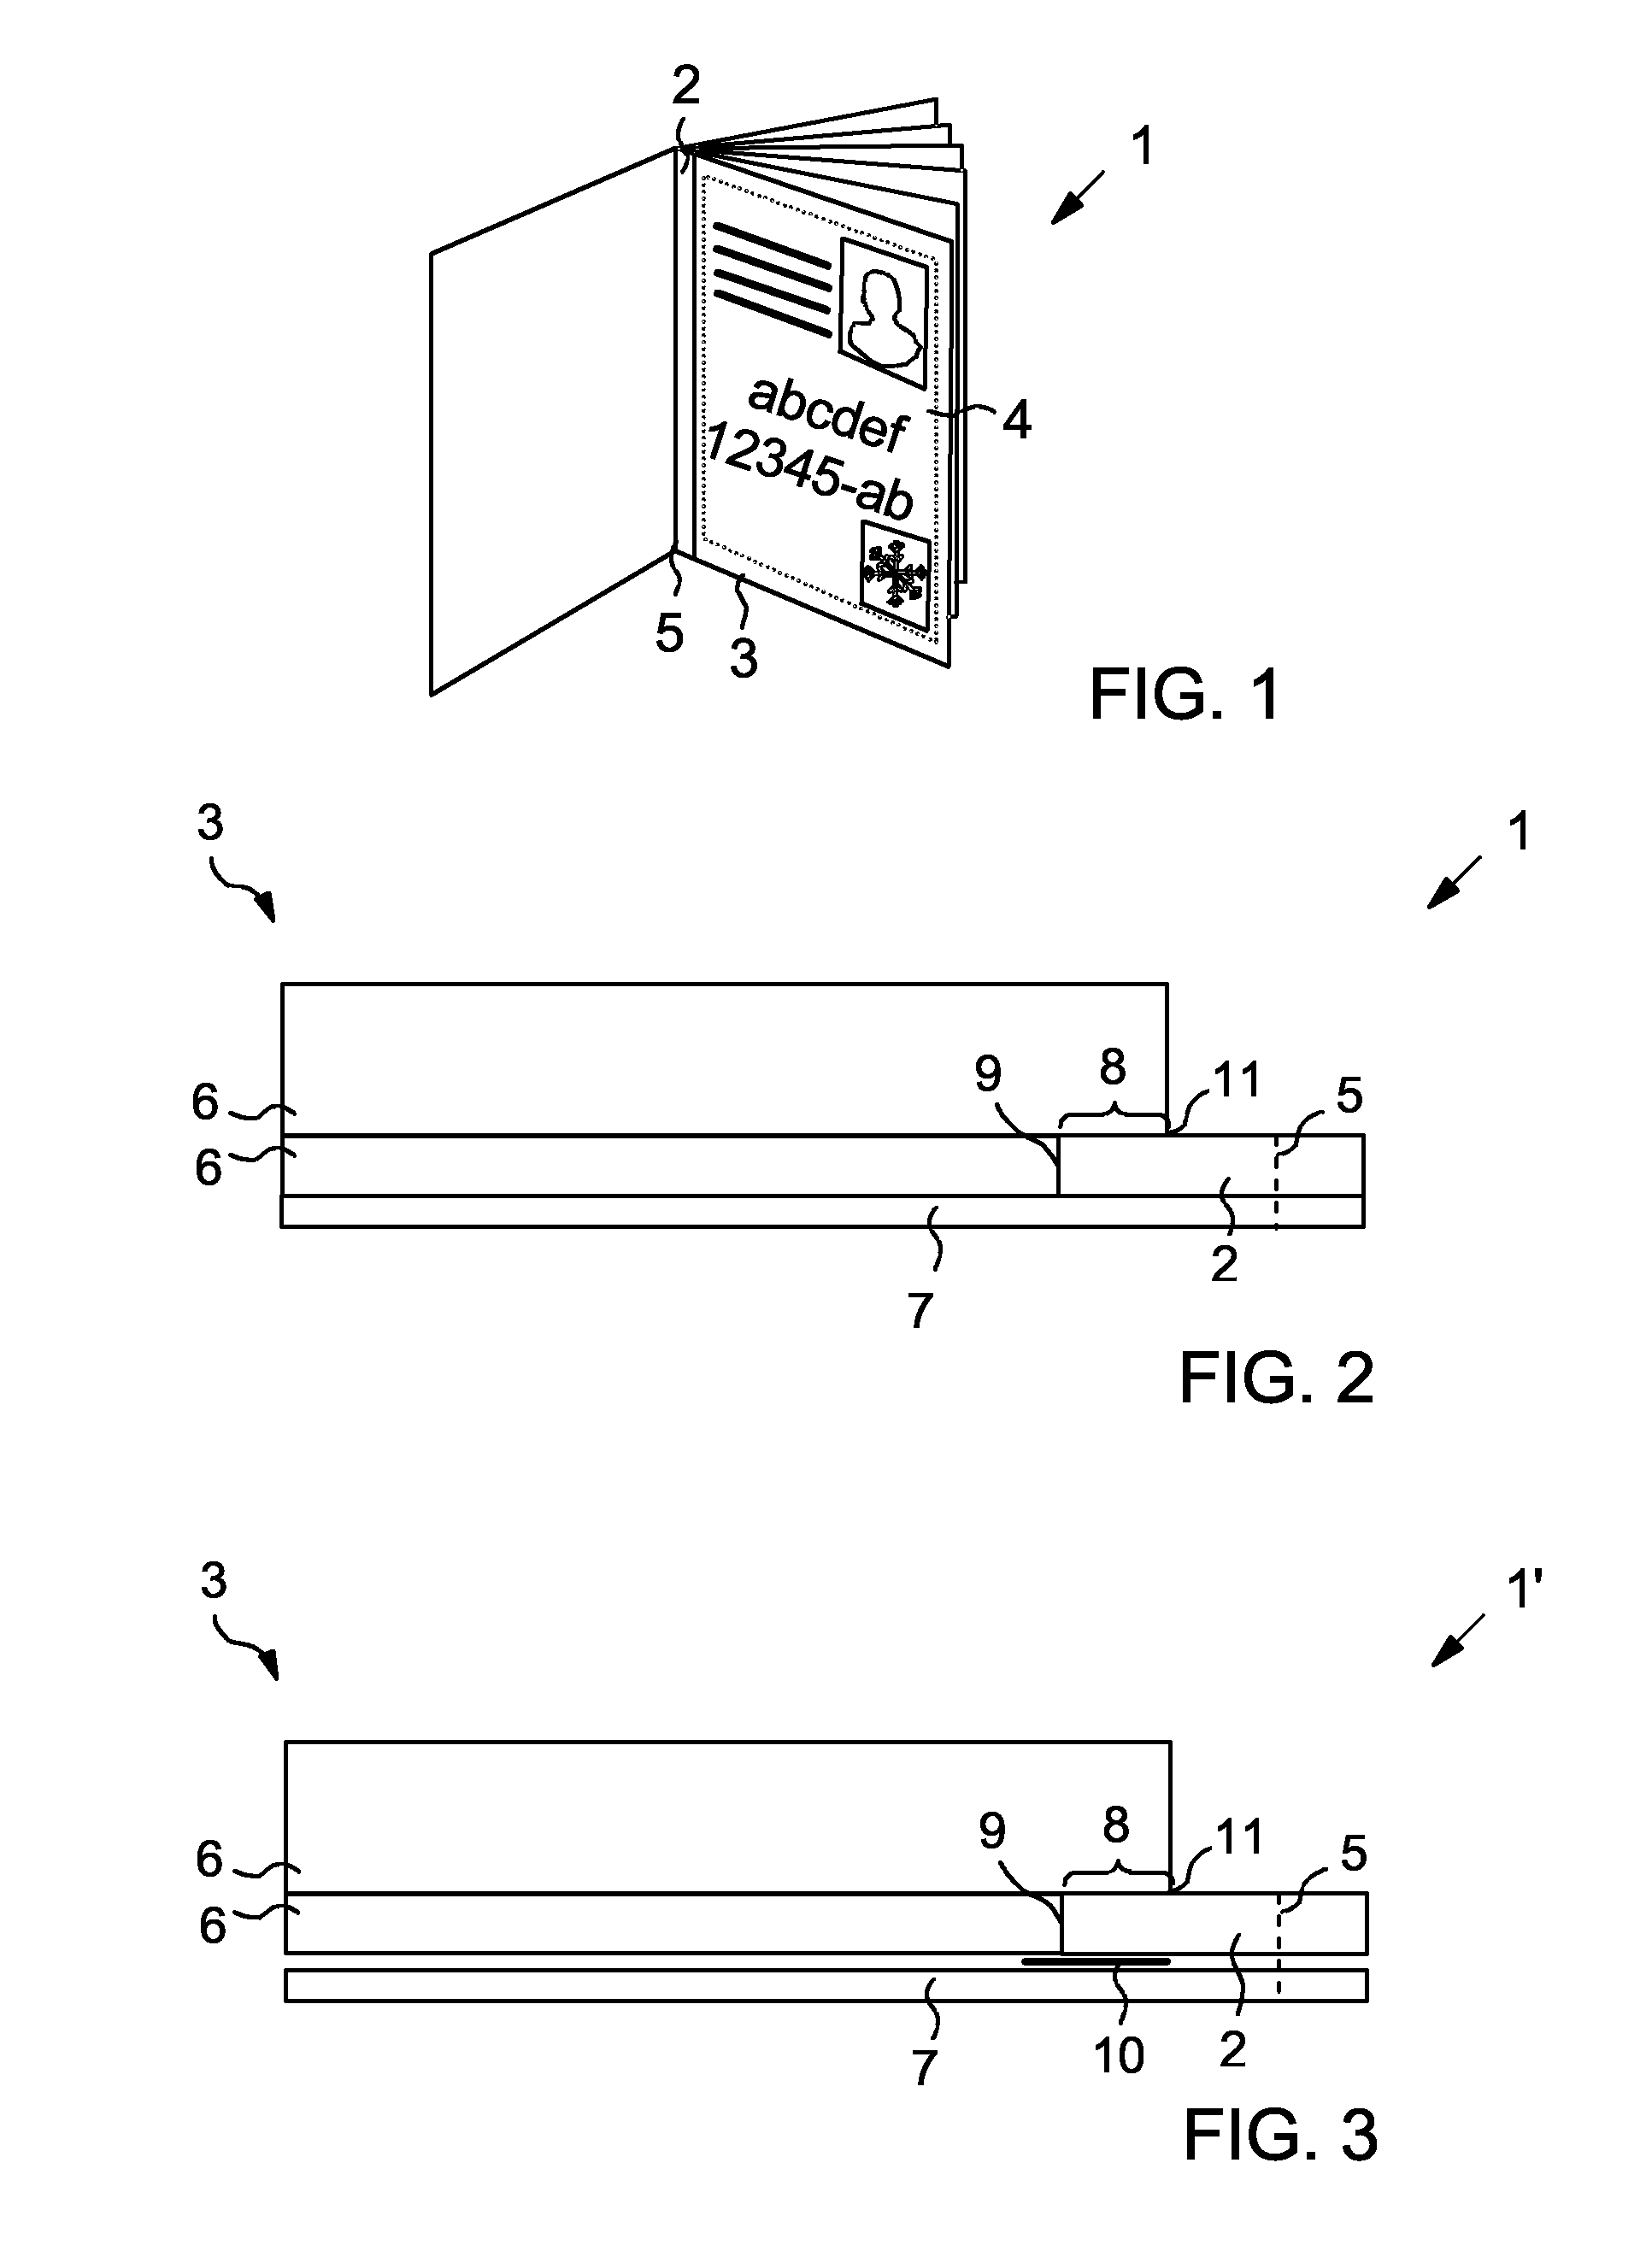 Method of Producing an Information Page For a Security Document